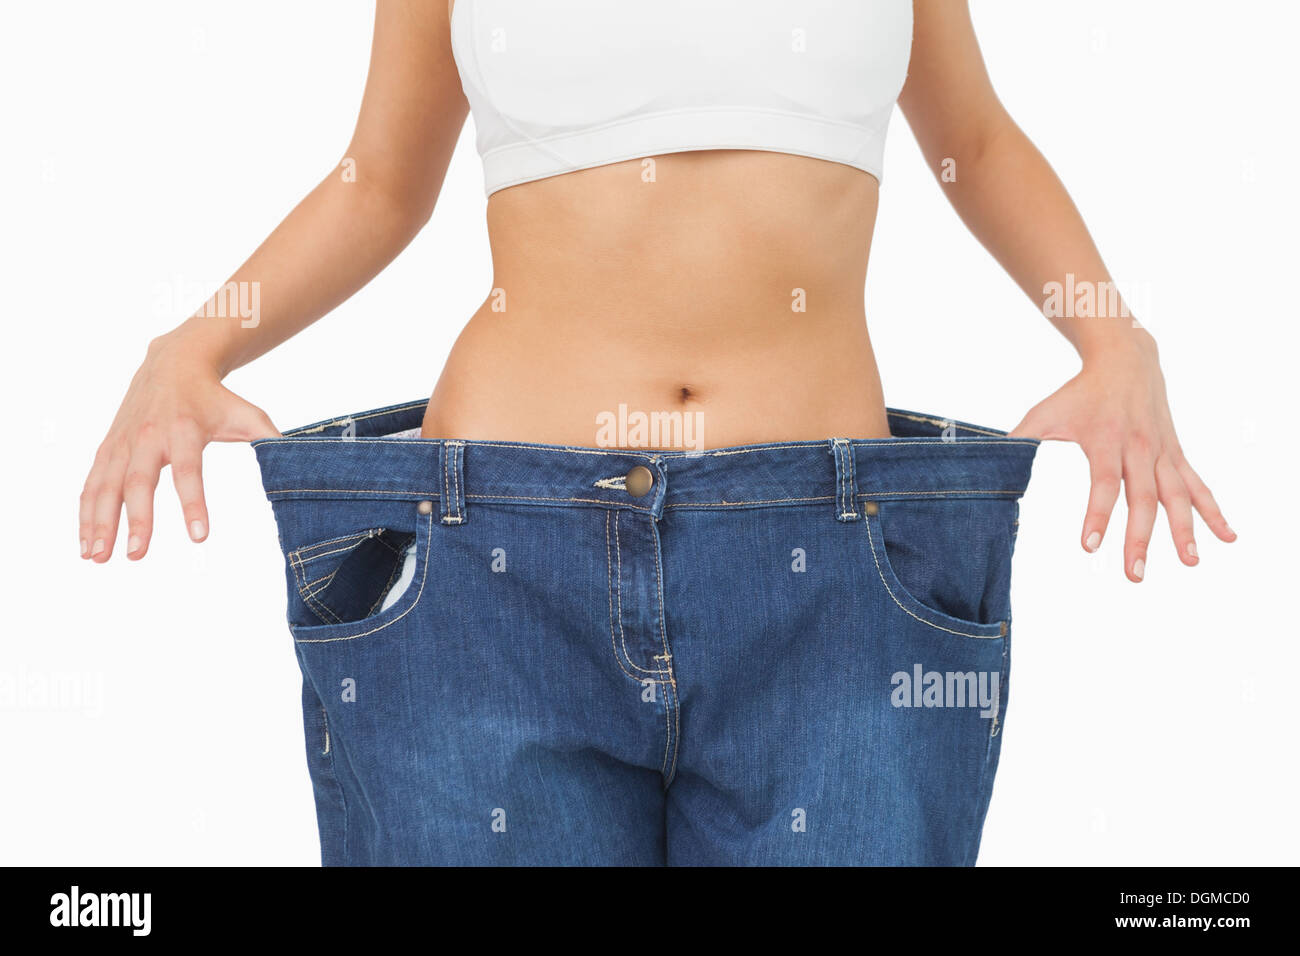 Mid section of young slim woman wearing too big jeans Stock Photo